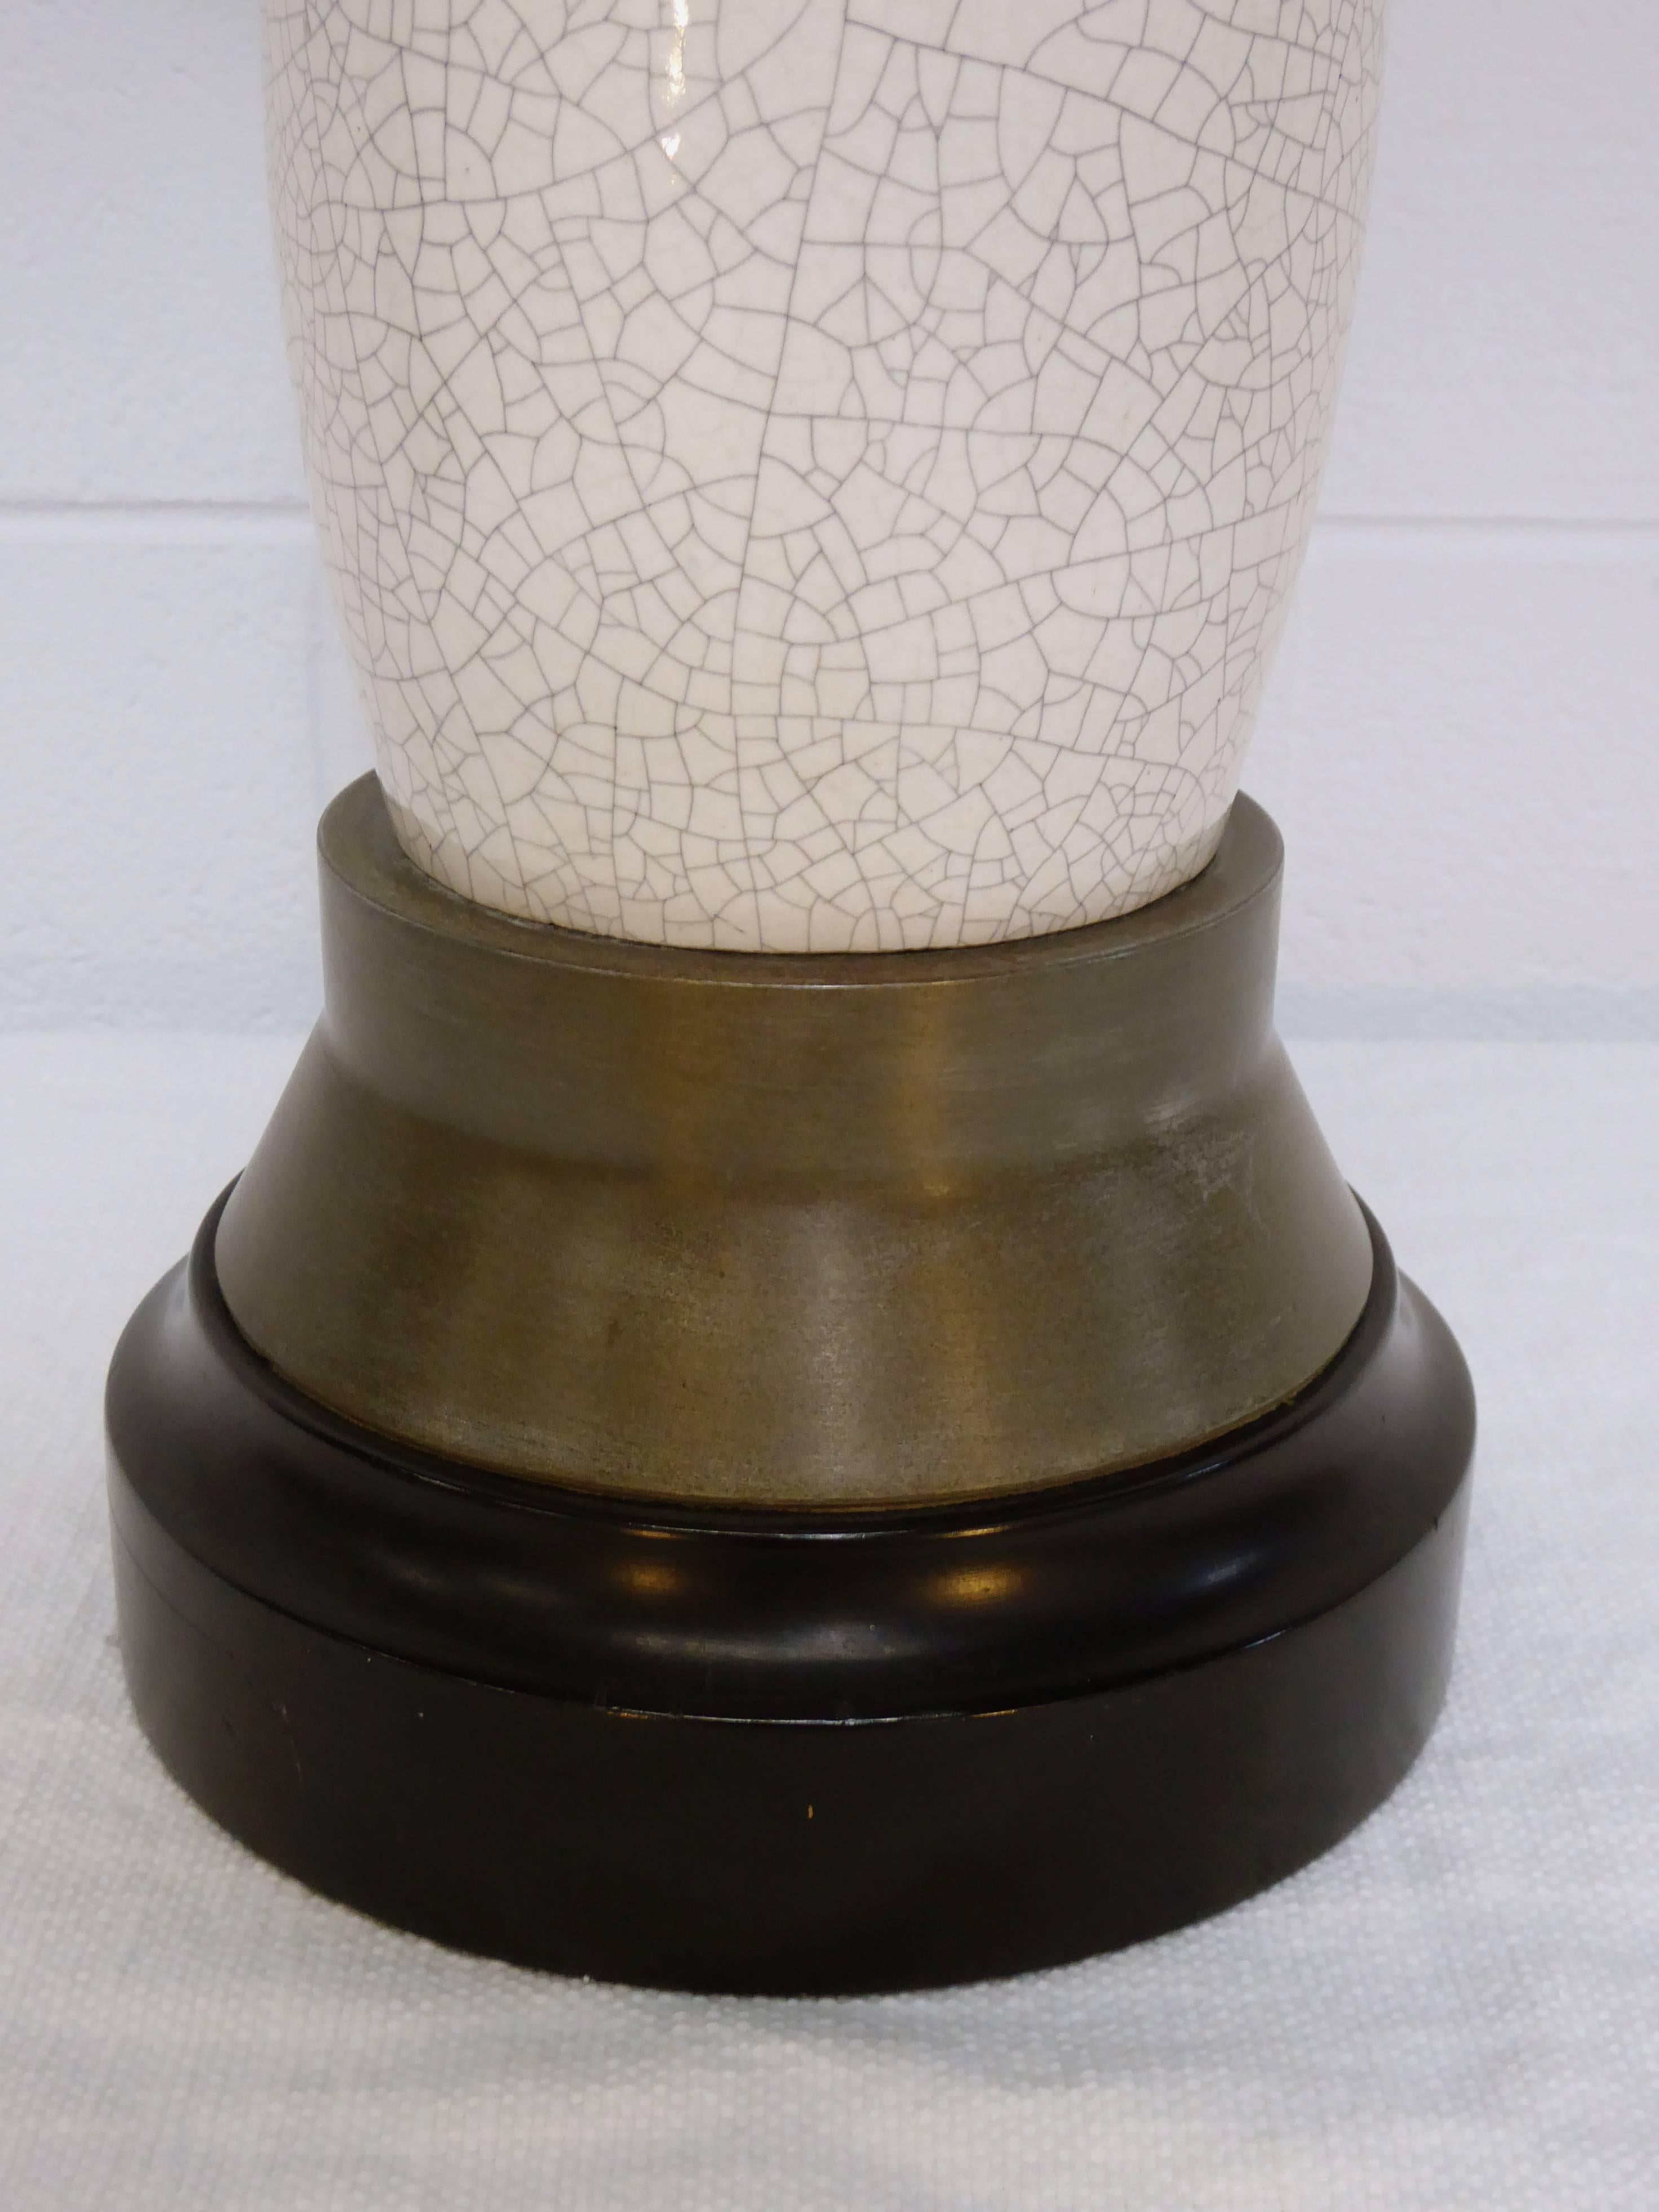 Exceptional Paul Laszlo Crackle Glazed Lamp In Excellent Condition For Sale In Northbrook, IL